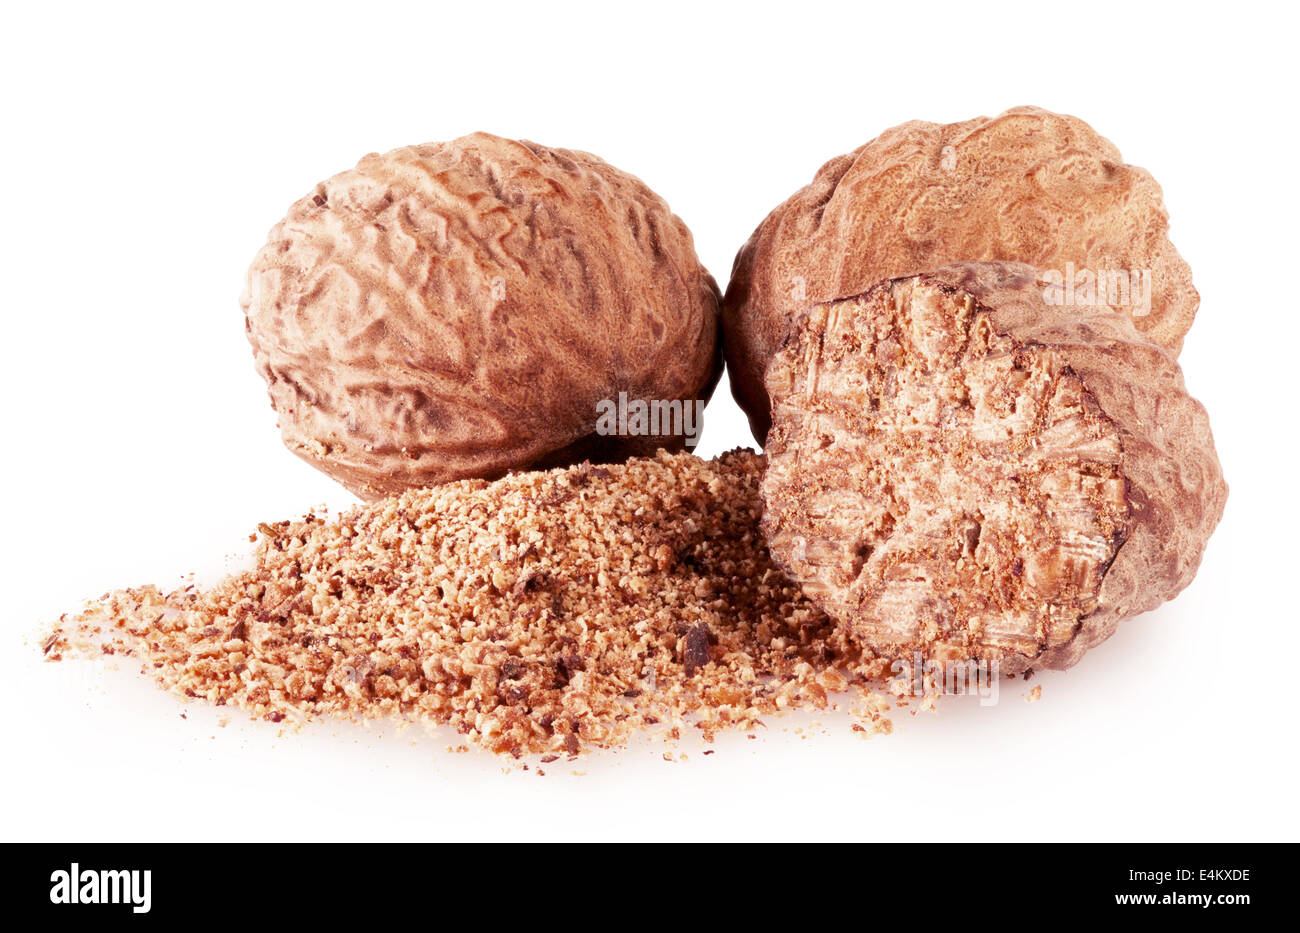 half and whole nutmegs isolated on a white background closeup Stock Photo